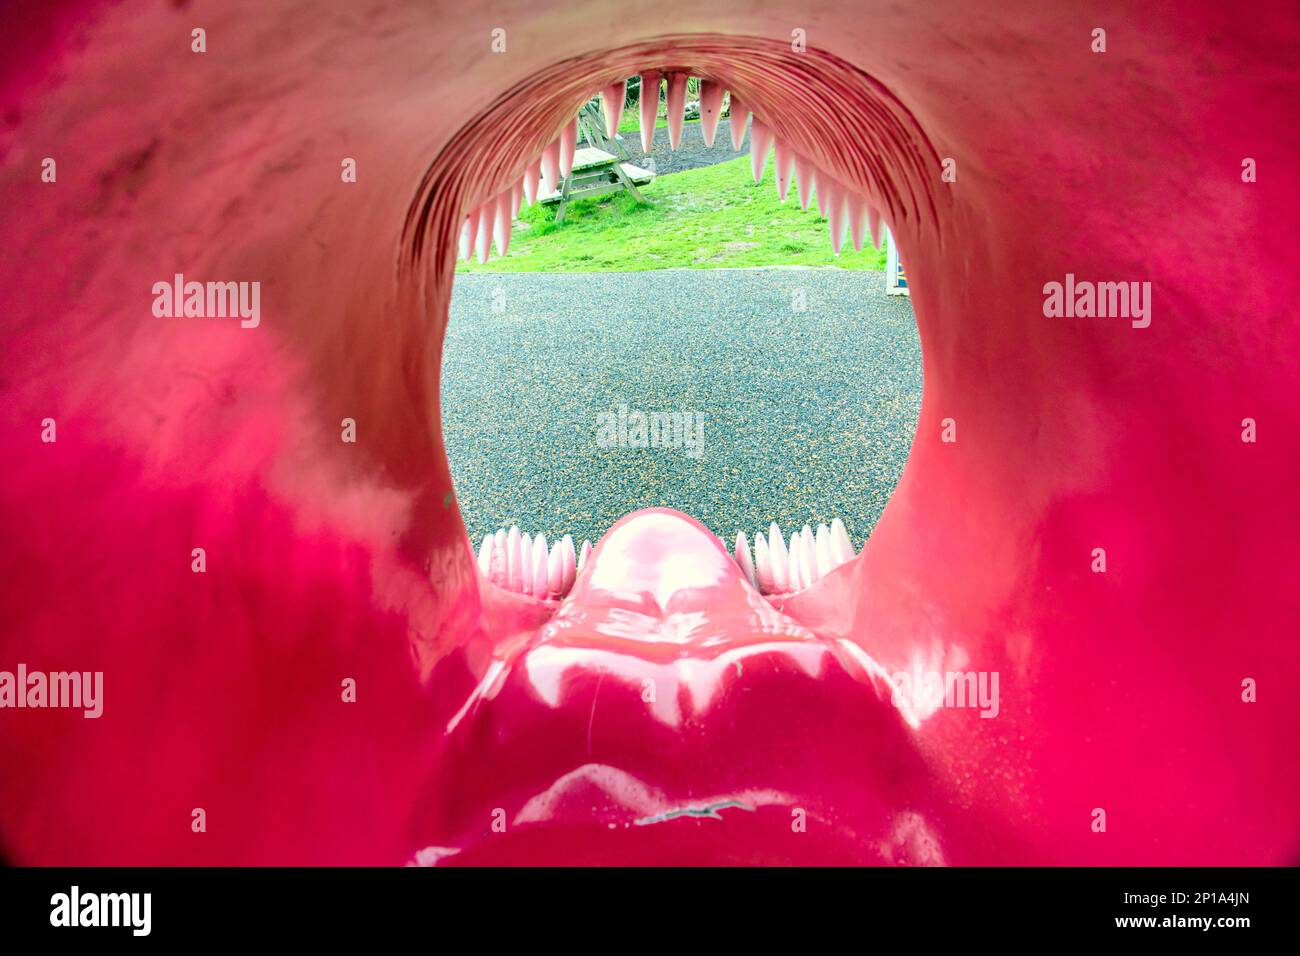 t rex playground lifelike toy head for selfies looking through the jaws ideal Photoshop mask Stock Photo